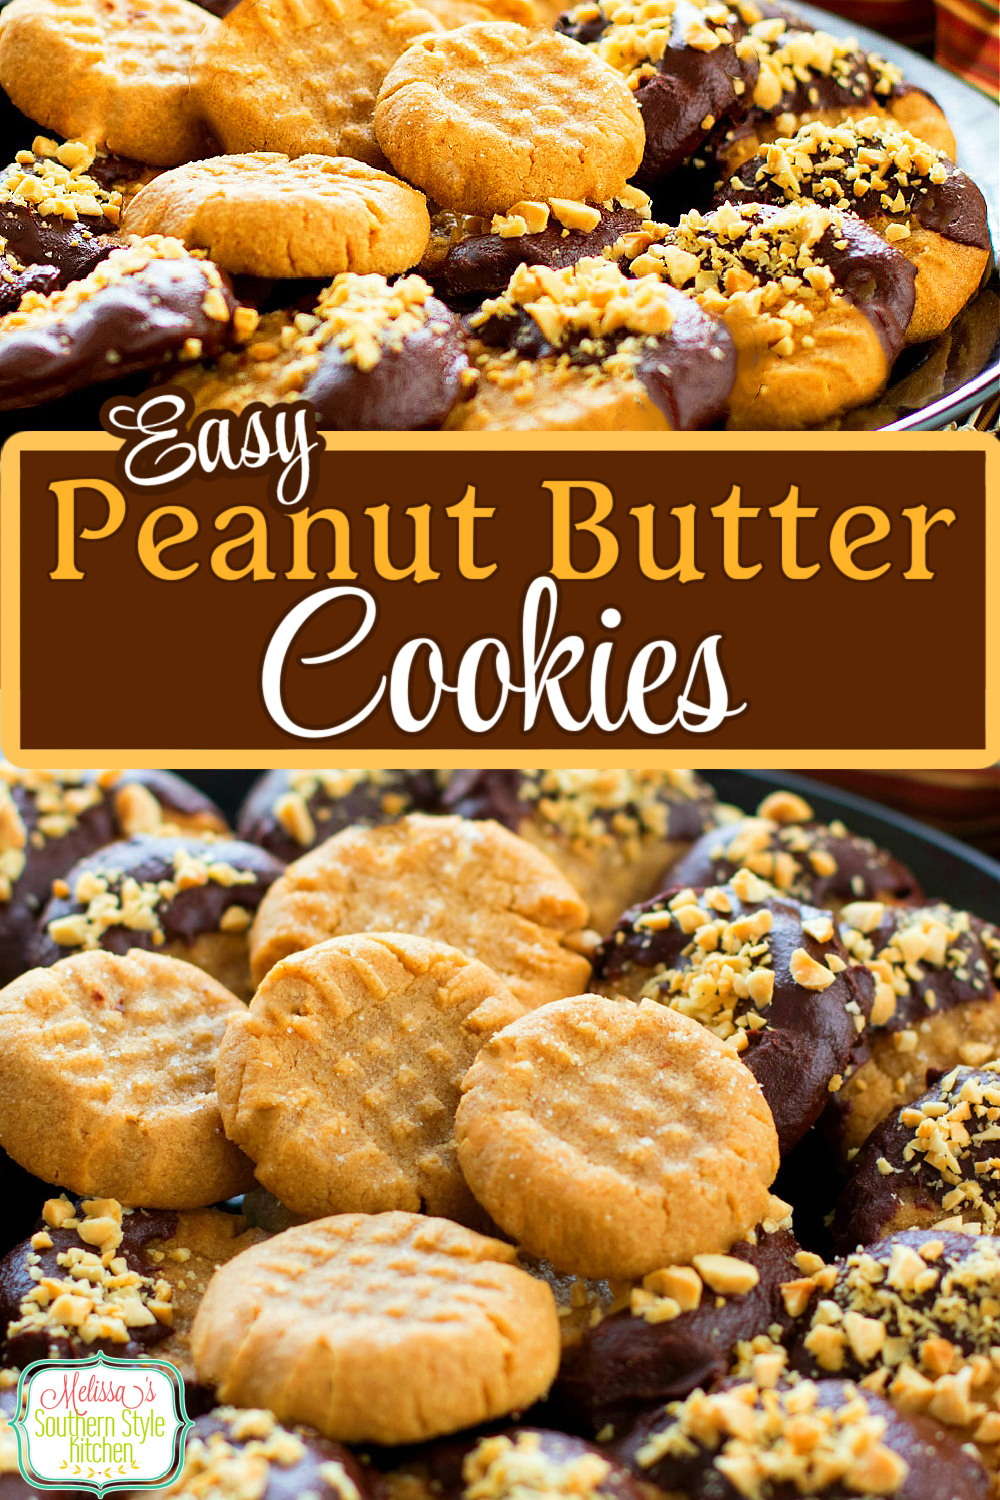 The world's best combo shines in these EASY Chocolate Dipped Peanut Butter Cookies #peanutbuttercookies #peanutbutter #cookierecipes #cookies #peanuts #chocolate #desserts #holidaybaking #holidays #easyrecipes #dessertfoodrecipes #southernfood #southernrecipes via @melissasssk